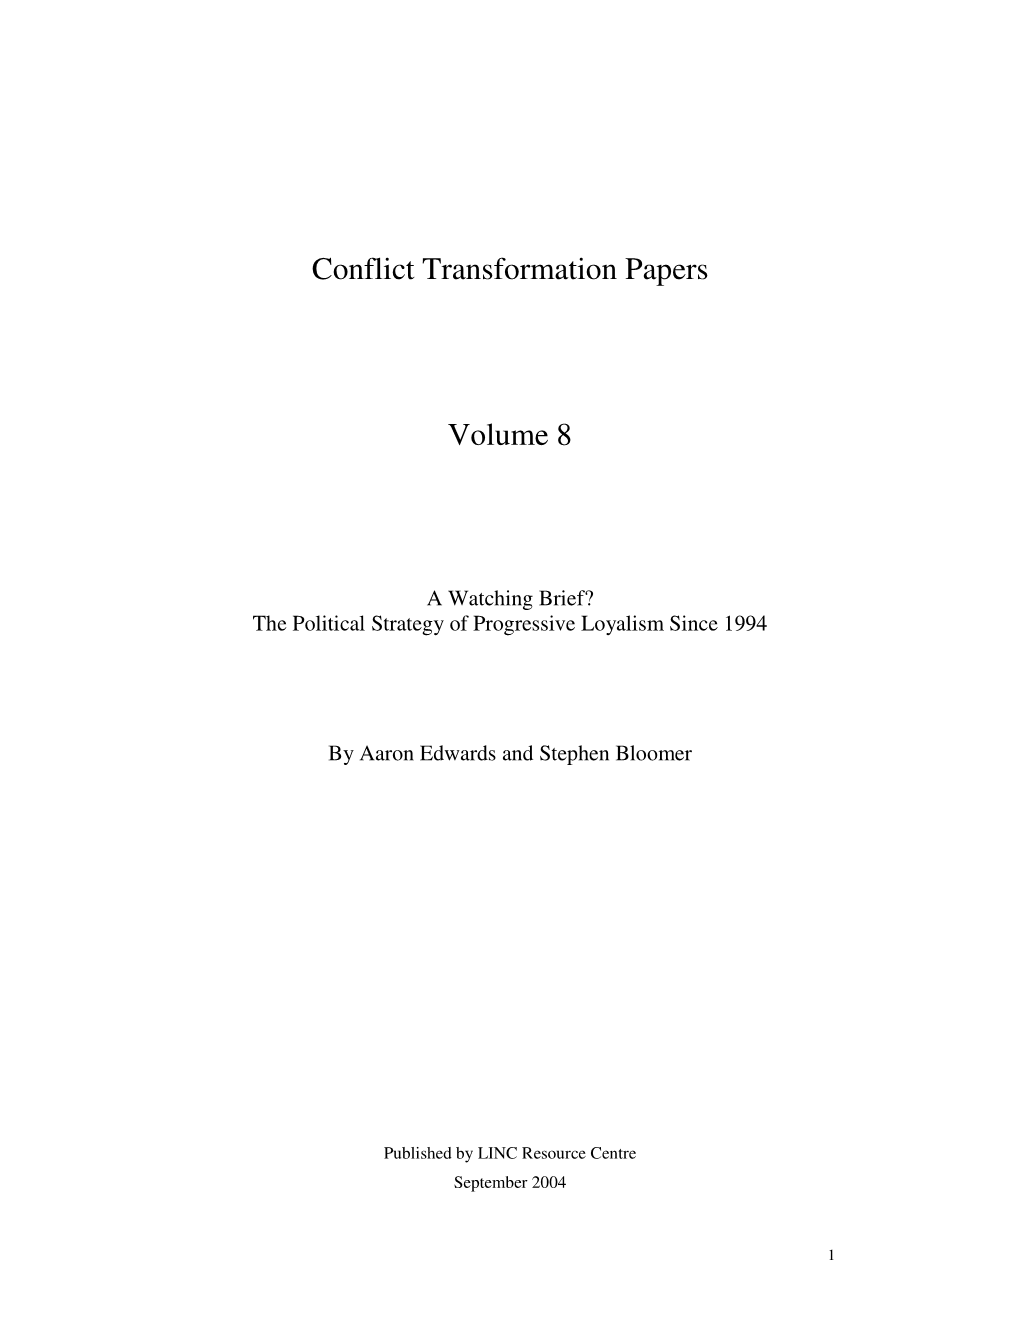 Conflict Transformation Papers Volume 8